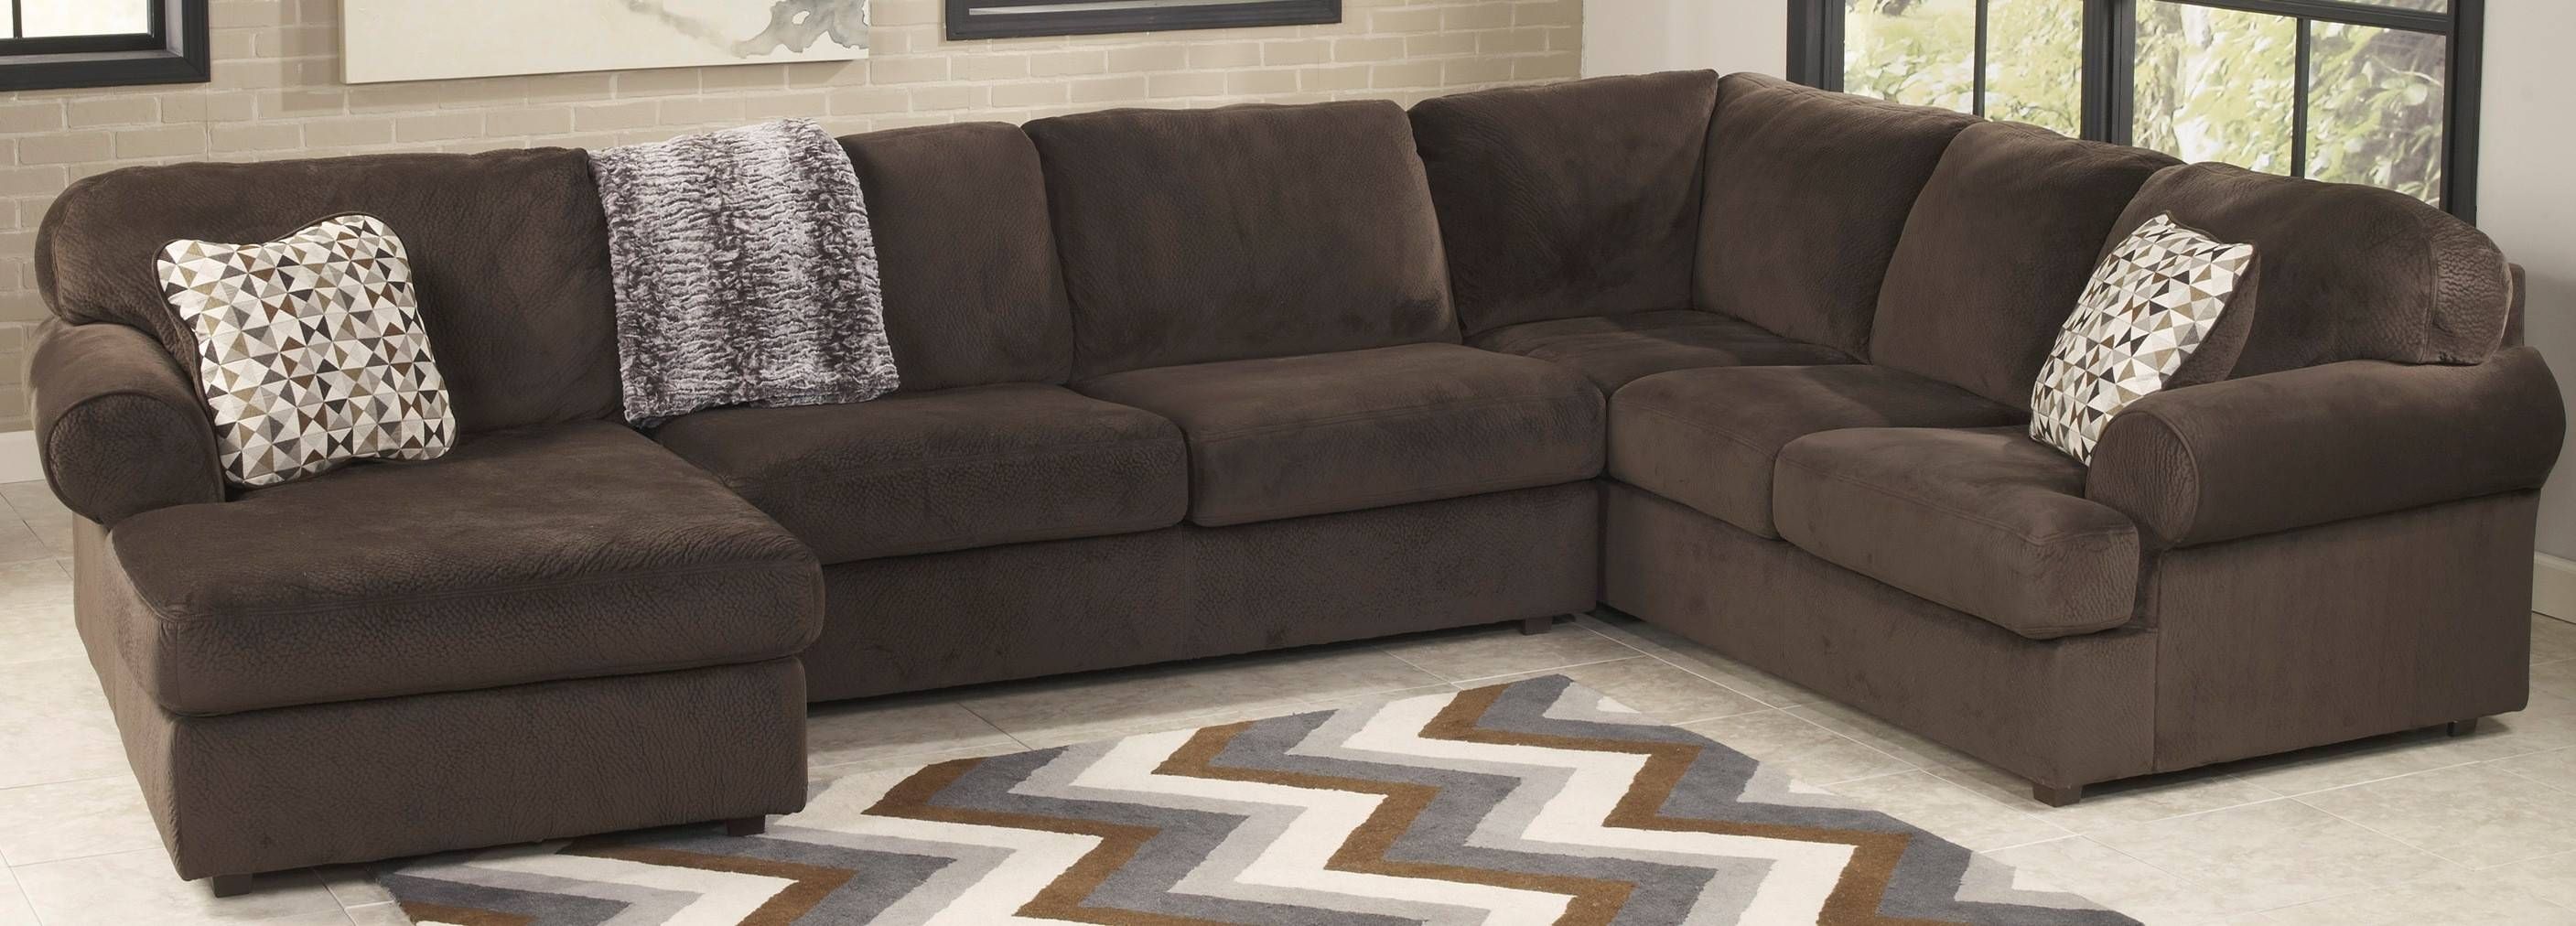 Furniture: Nice Havertys Furniture Review For Better Furniture Inside Havertys Piedmont Sectional Sofas (View 13 of 15)